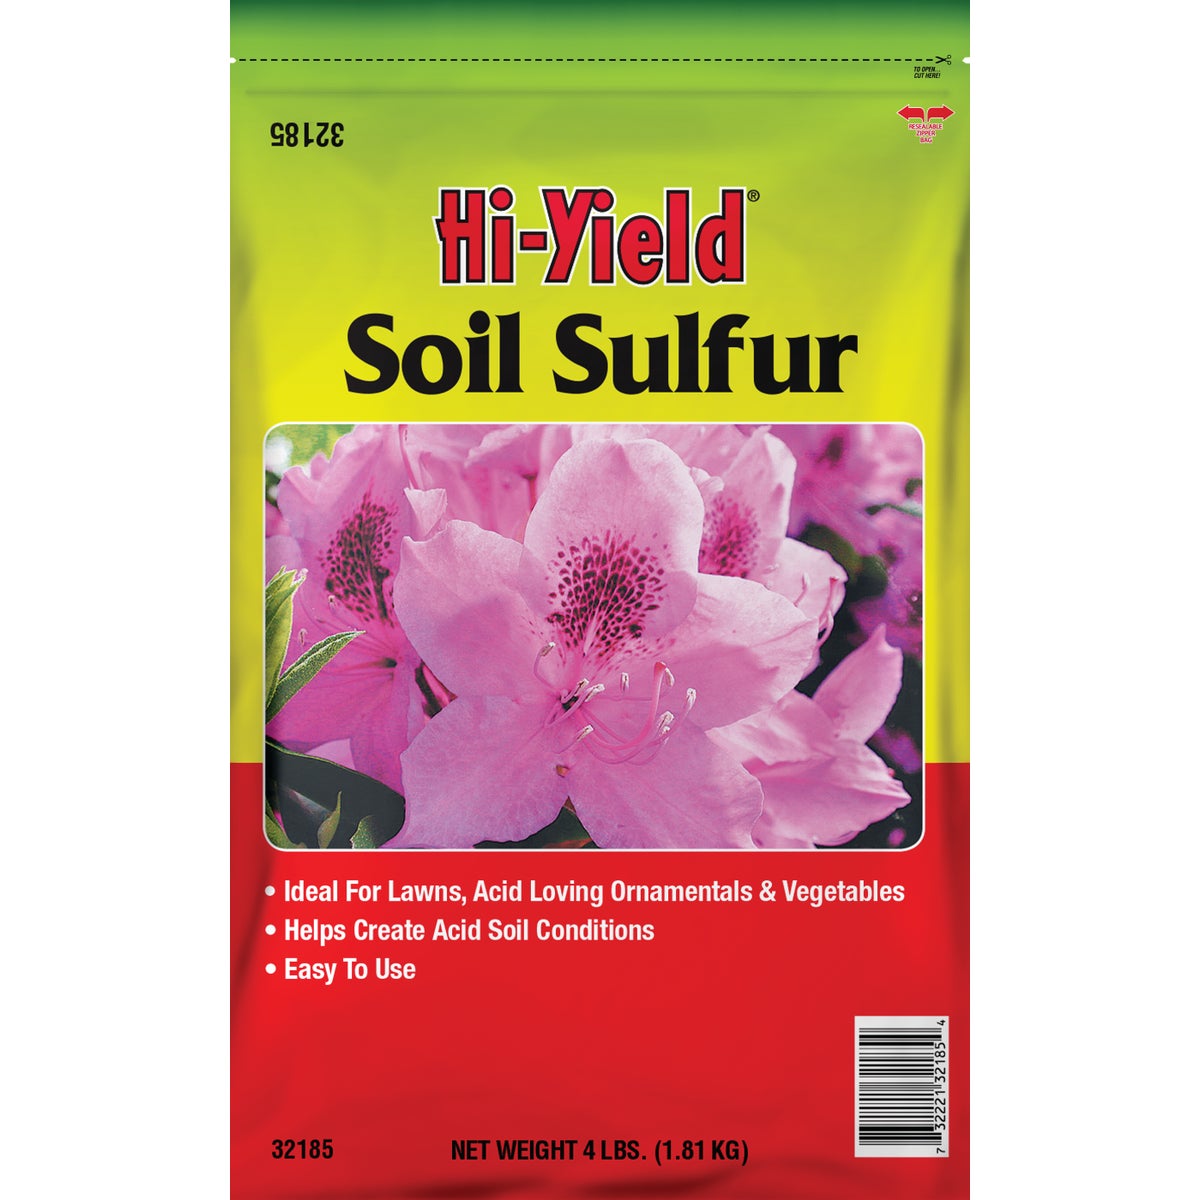 Item 700705, Helps create acid soil conditions, acts as a soil conditioner by lowering 